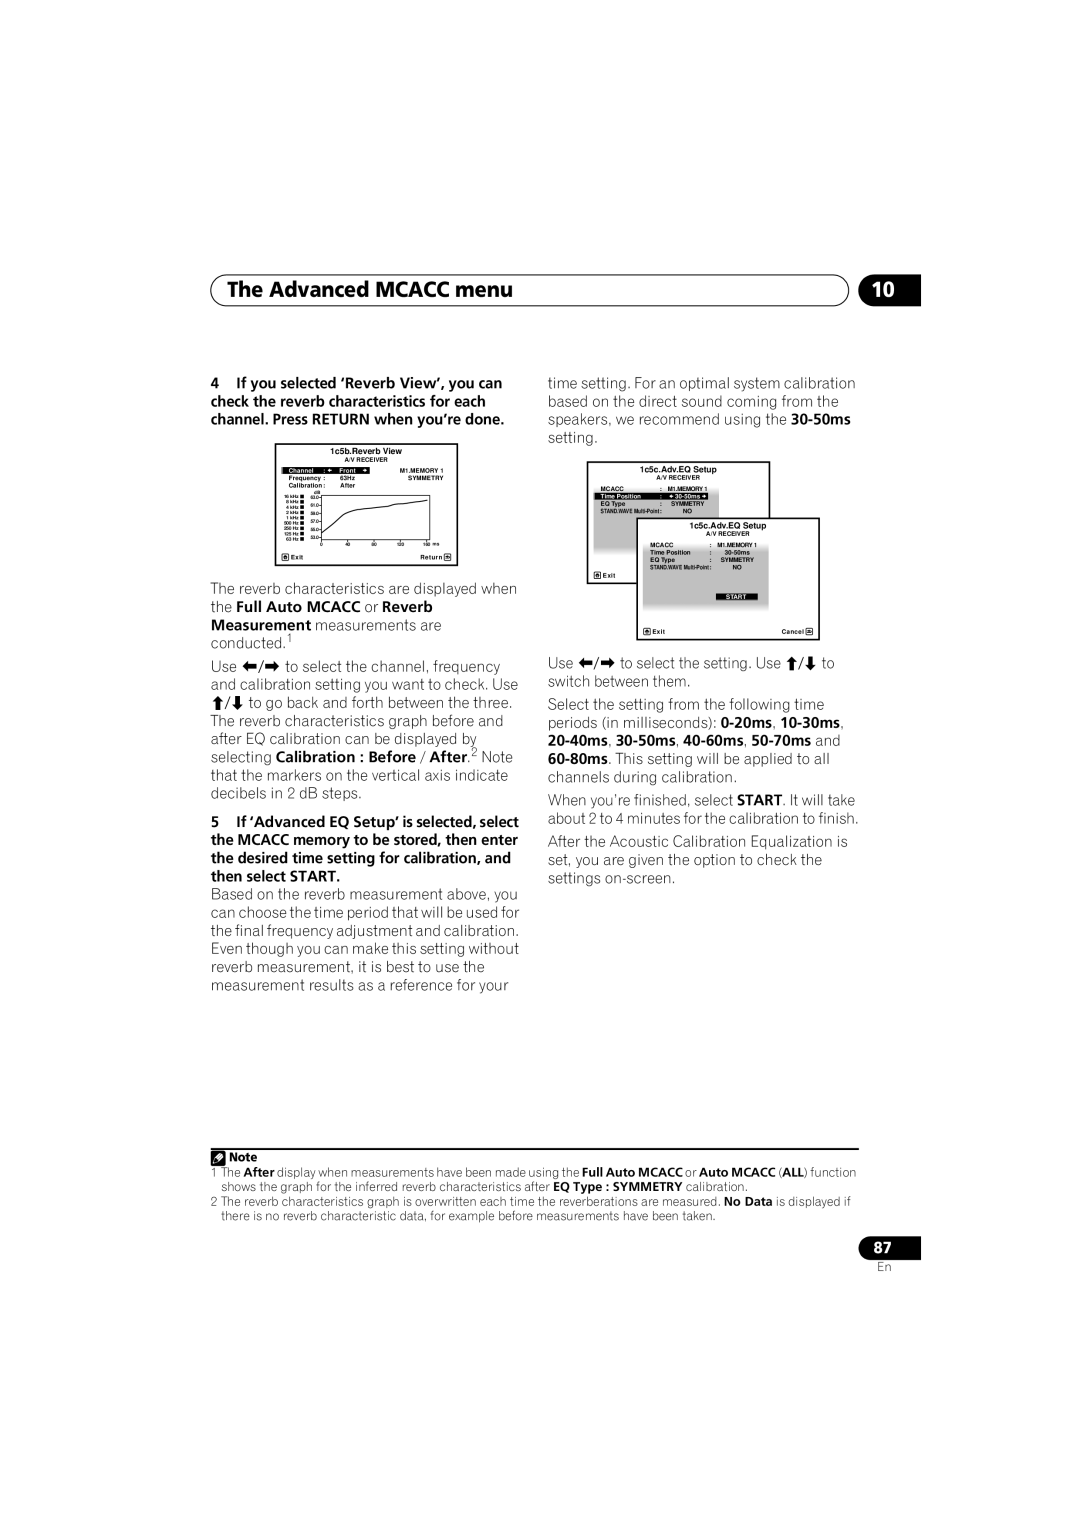 Pioneer VSX-919AH-S manual The Advanced MCACC menu, Select the setting from the following time 